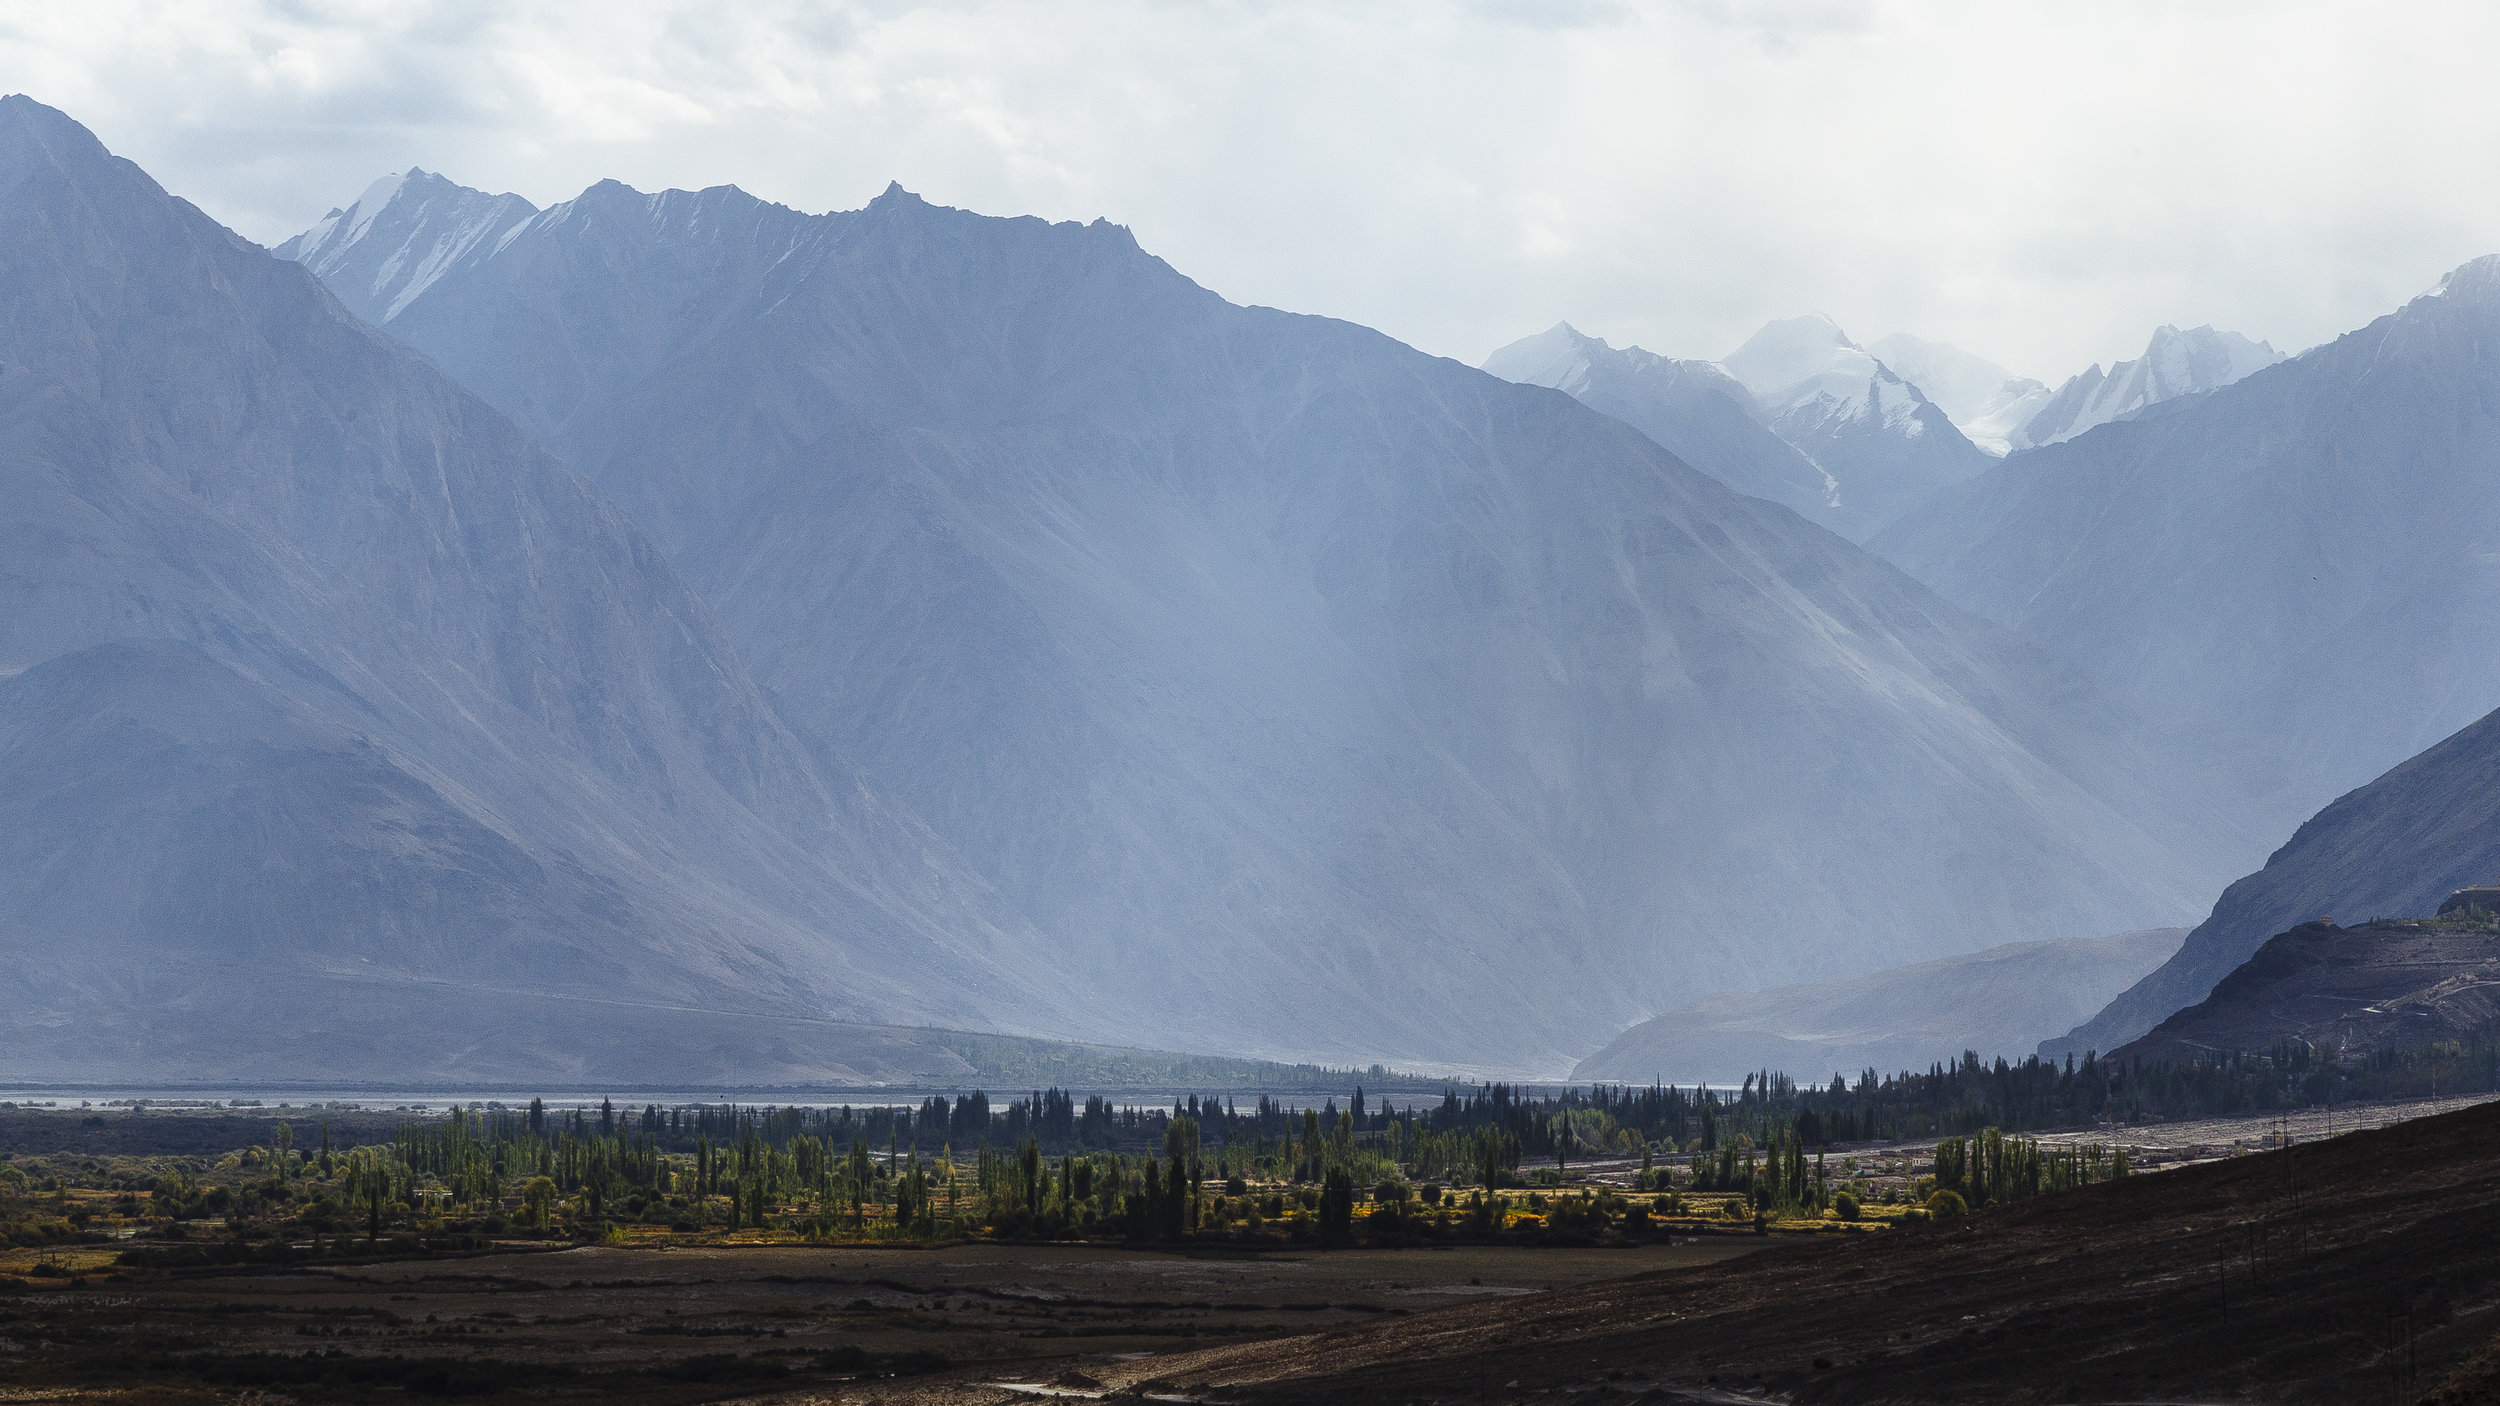 High mountains of Nubra Valley